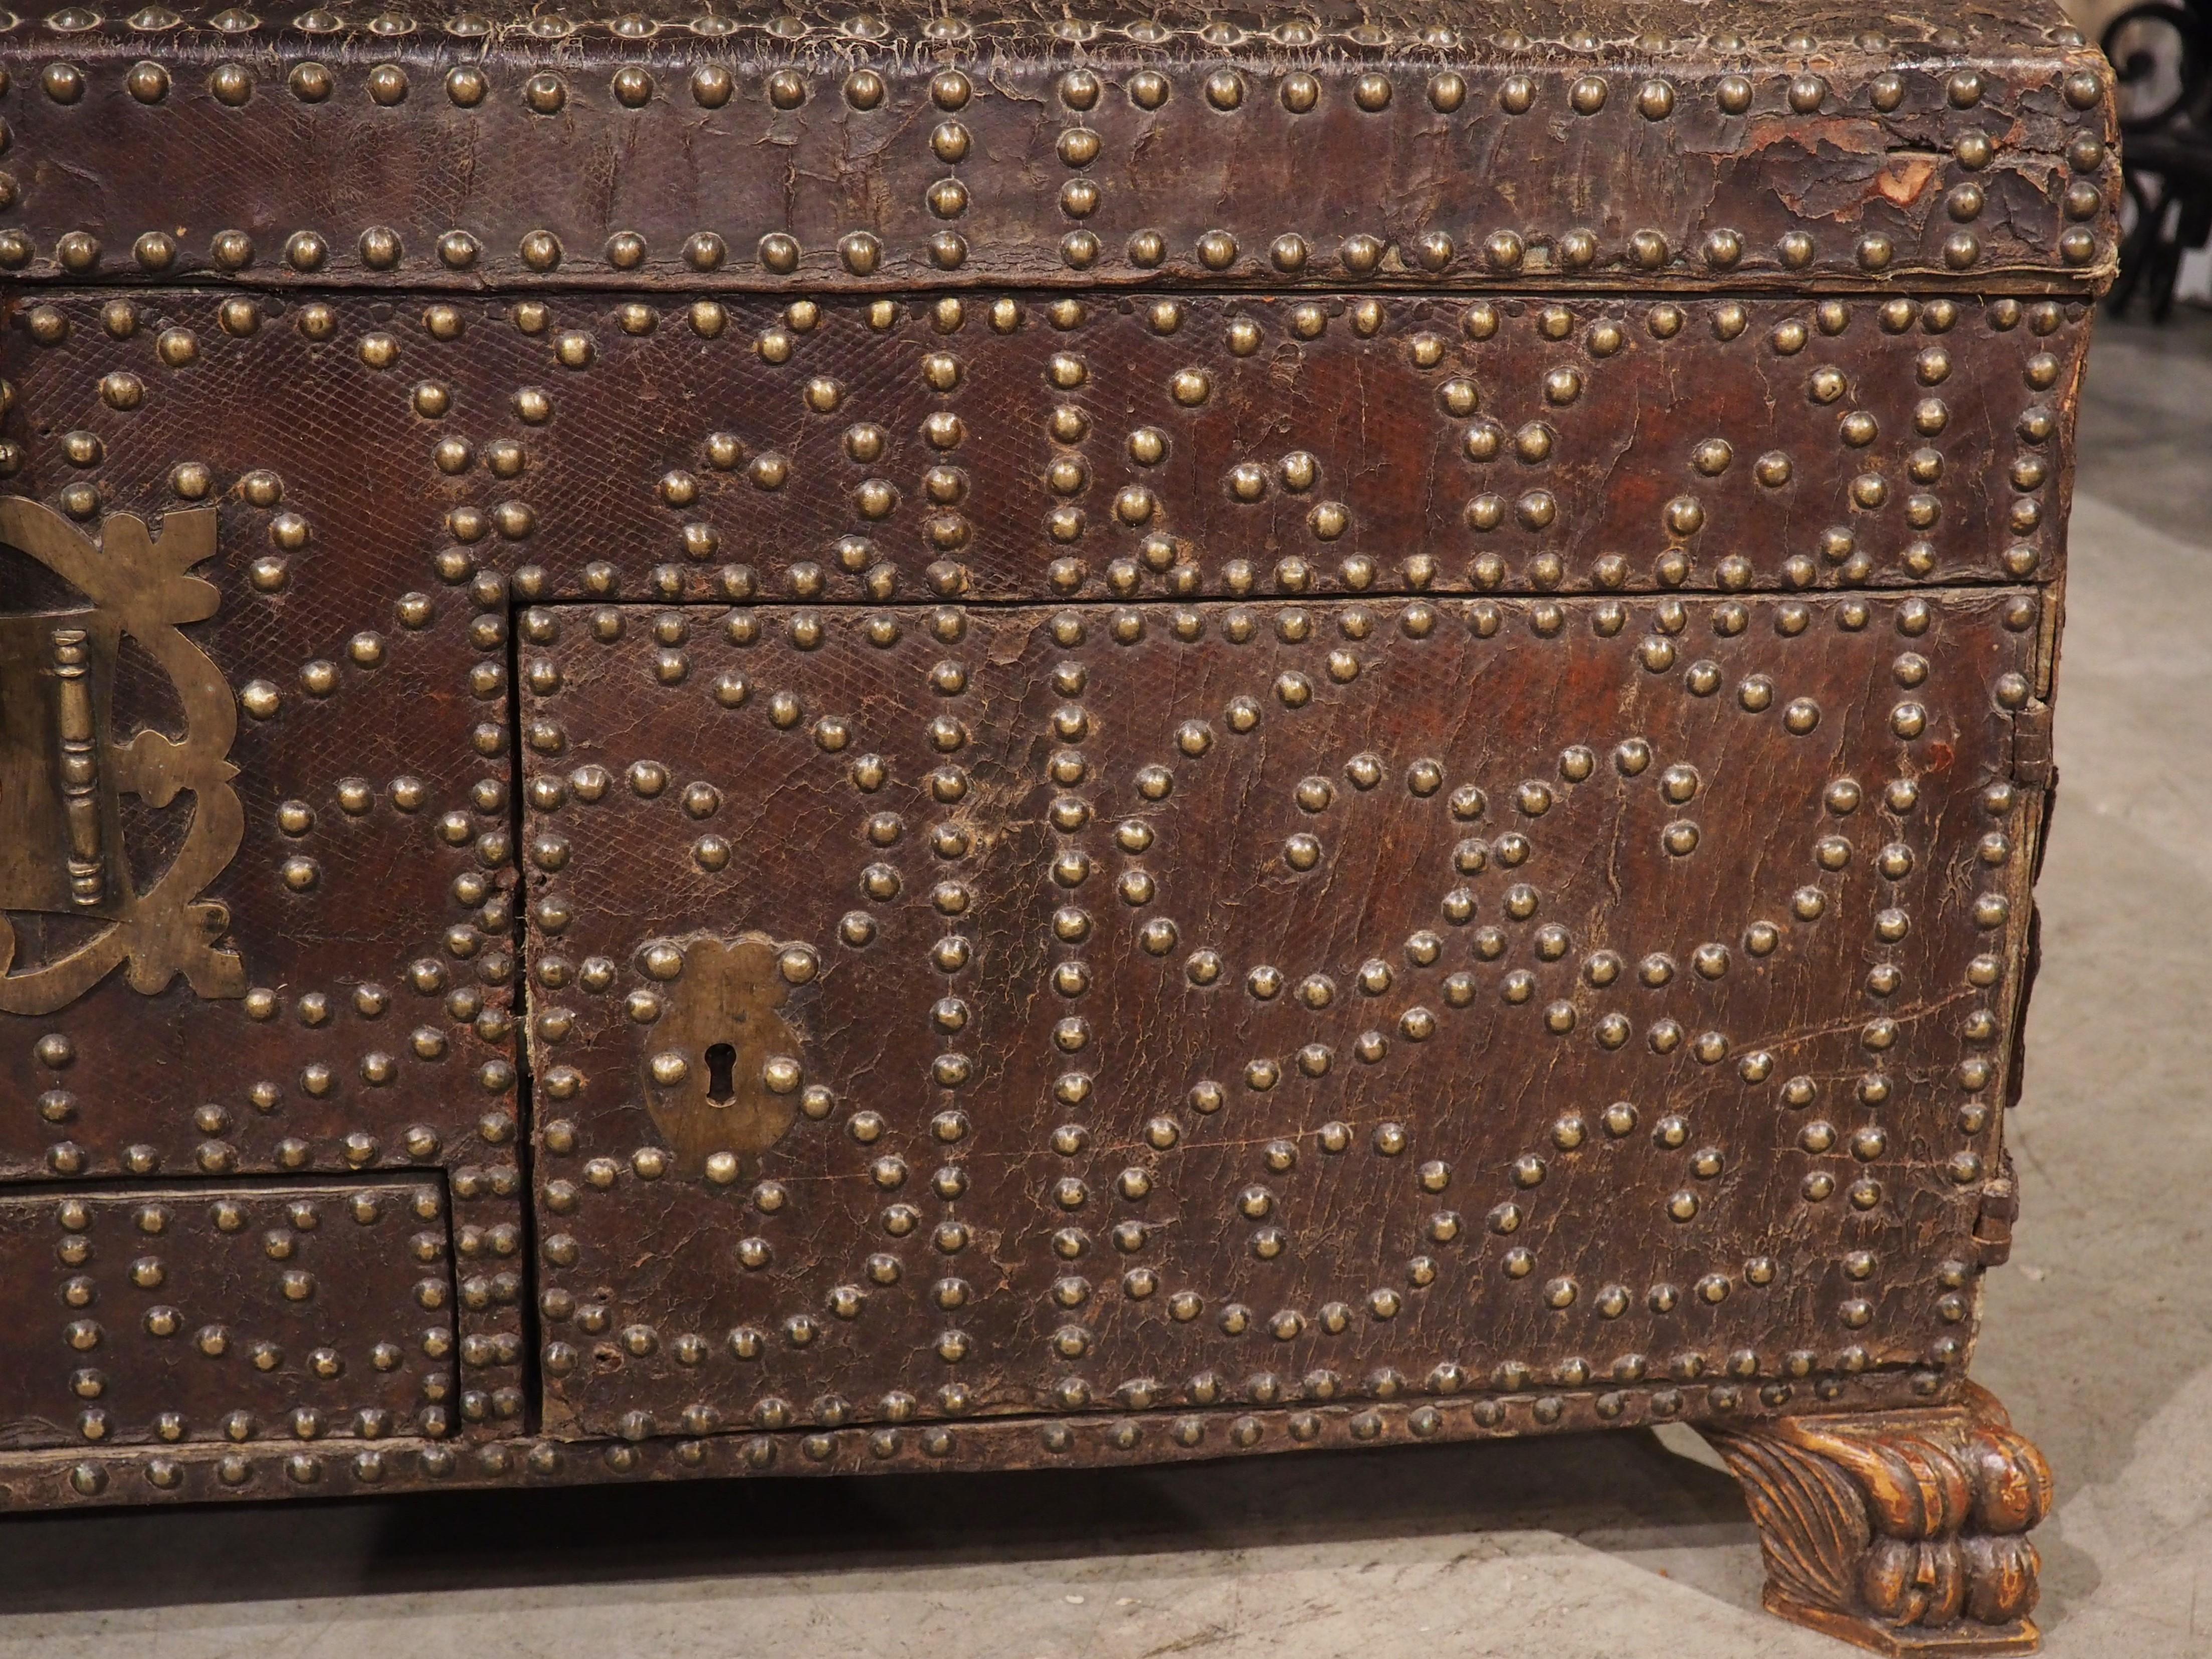 Metal 18th Century Spanish Studded Leather Trunk with Lockable Compartments For Sale